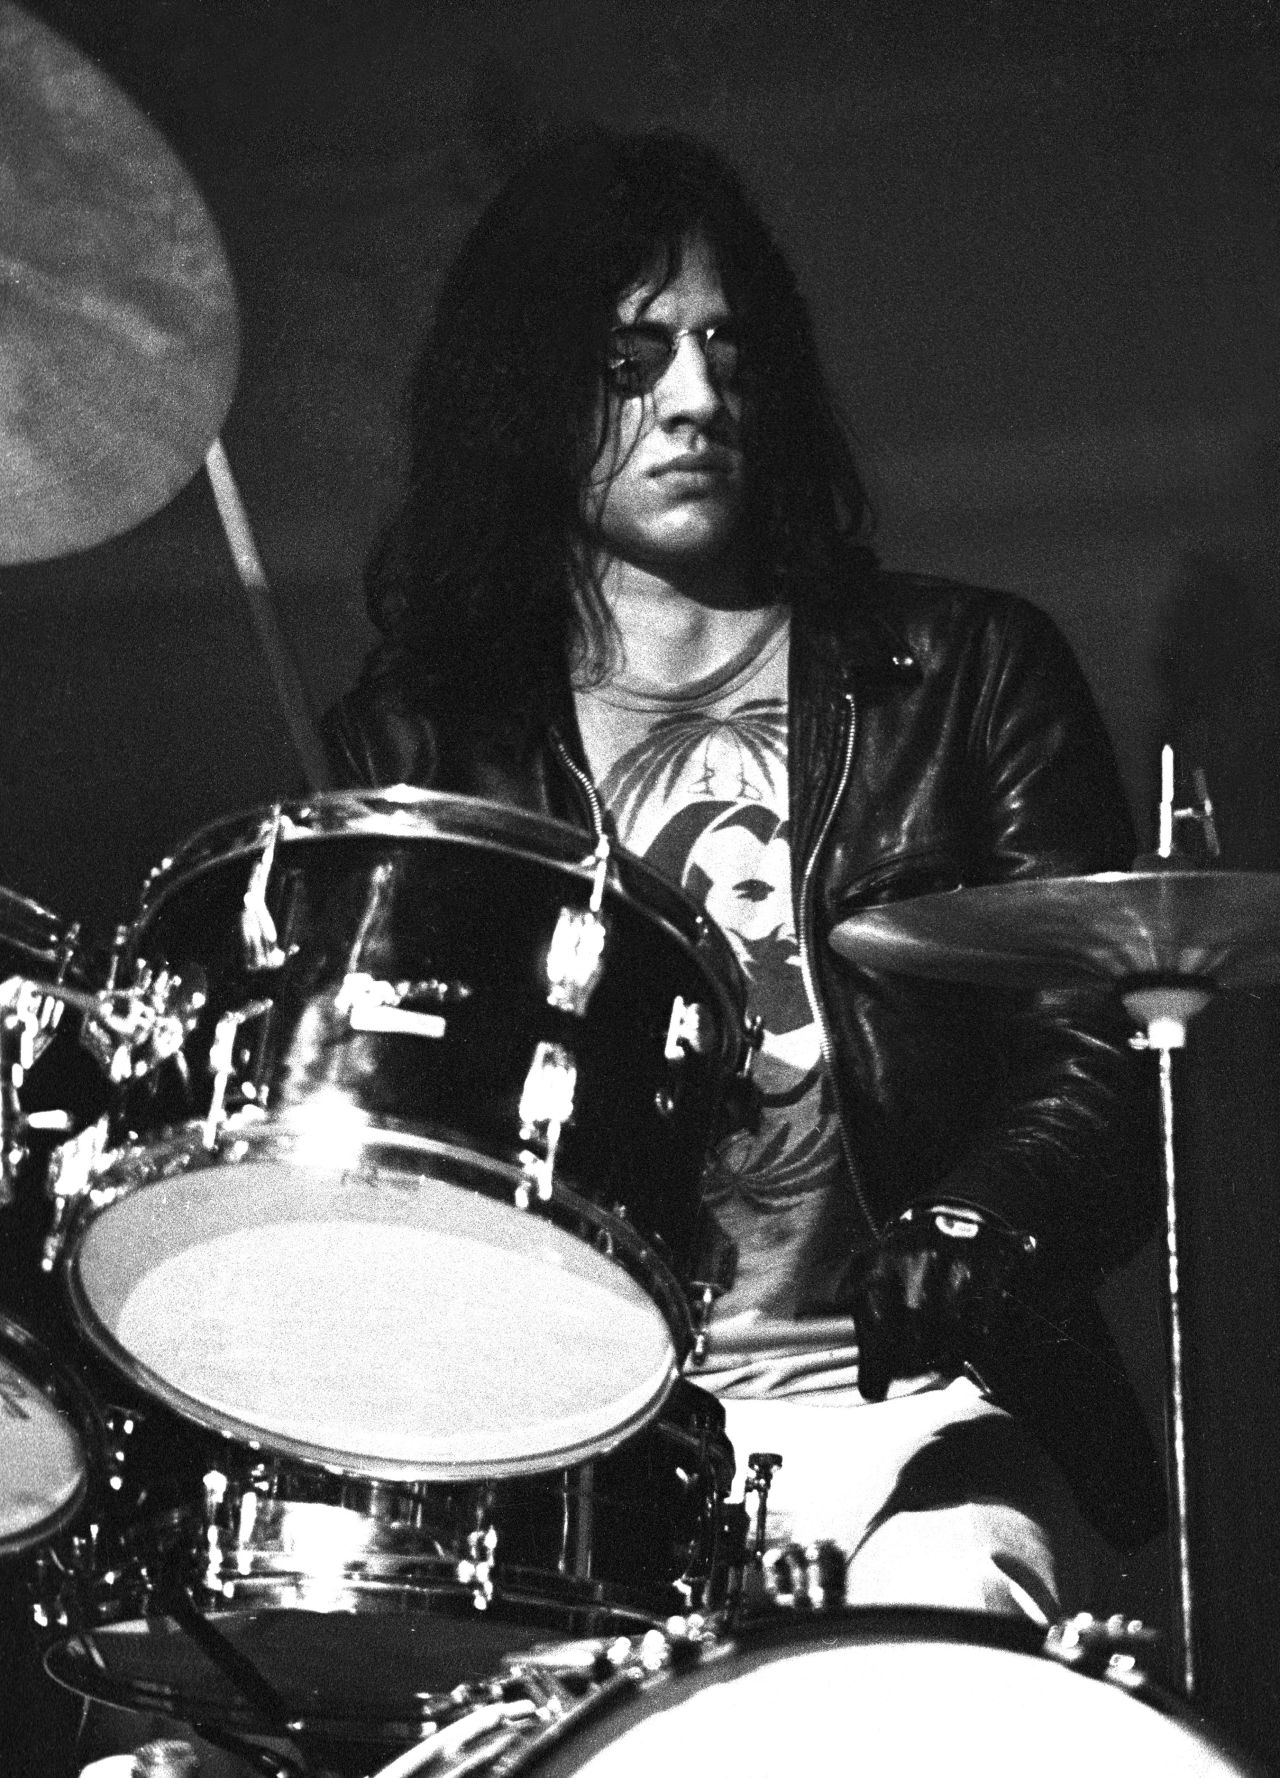 Drummer <a href="http://www.gettyimages.com/detail/news-photo/drummer-scott-asheton-of-iggy-andthe-stooges-performs-in-news-photo/479298893" target="_blank" target="_blank">Scott Asheton,</a> who co-founded and played drums for the influential proto-punk band The Stooges, died March 15. He was 64.